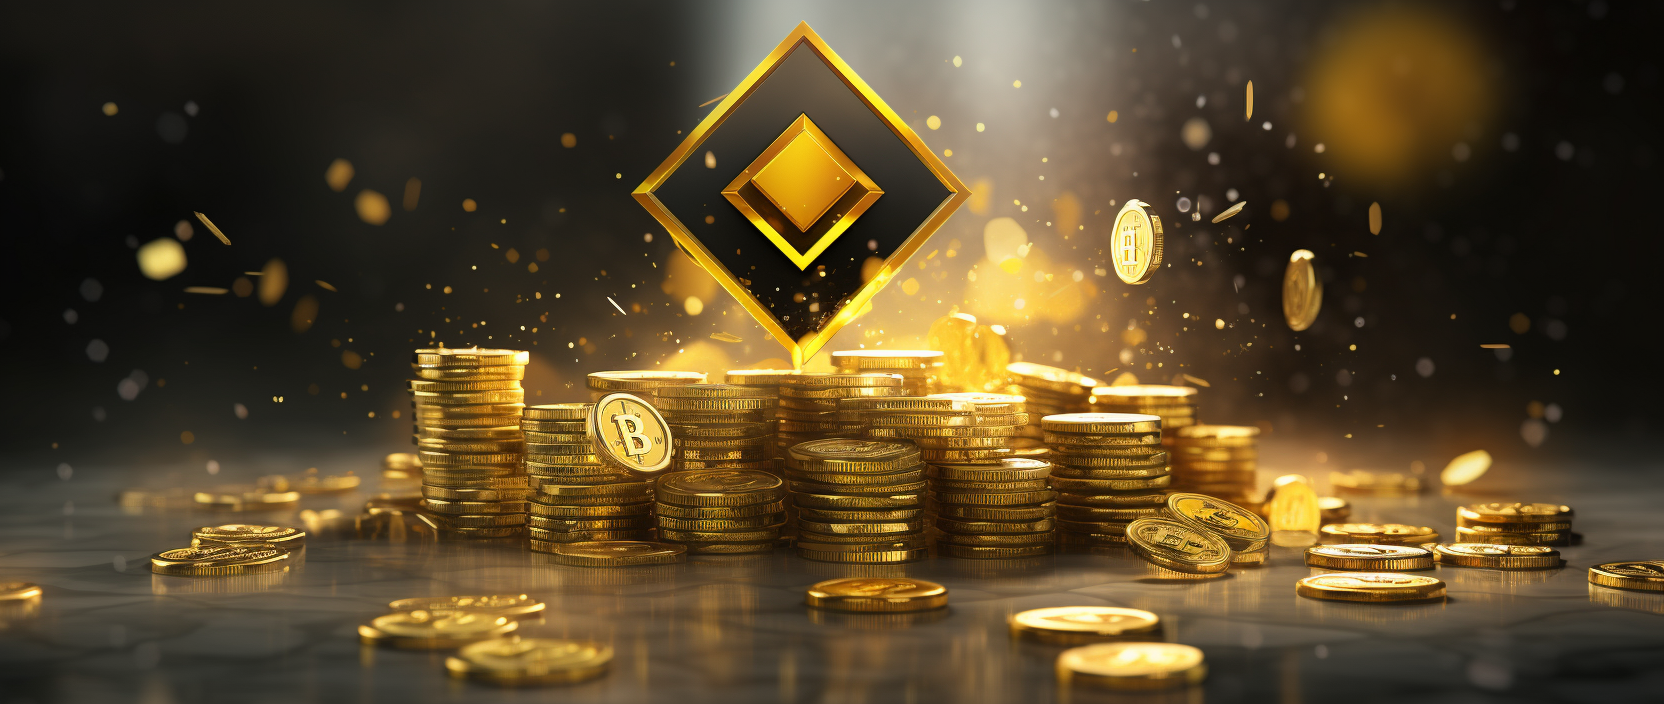 Binance Launchpad opens up new possibilities in the world of cryptocurrencies - news